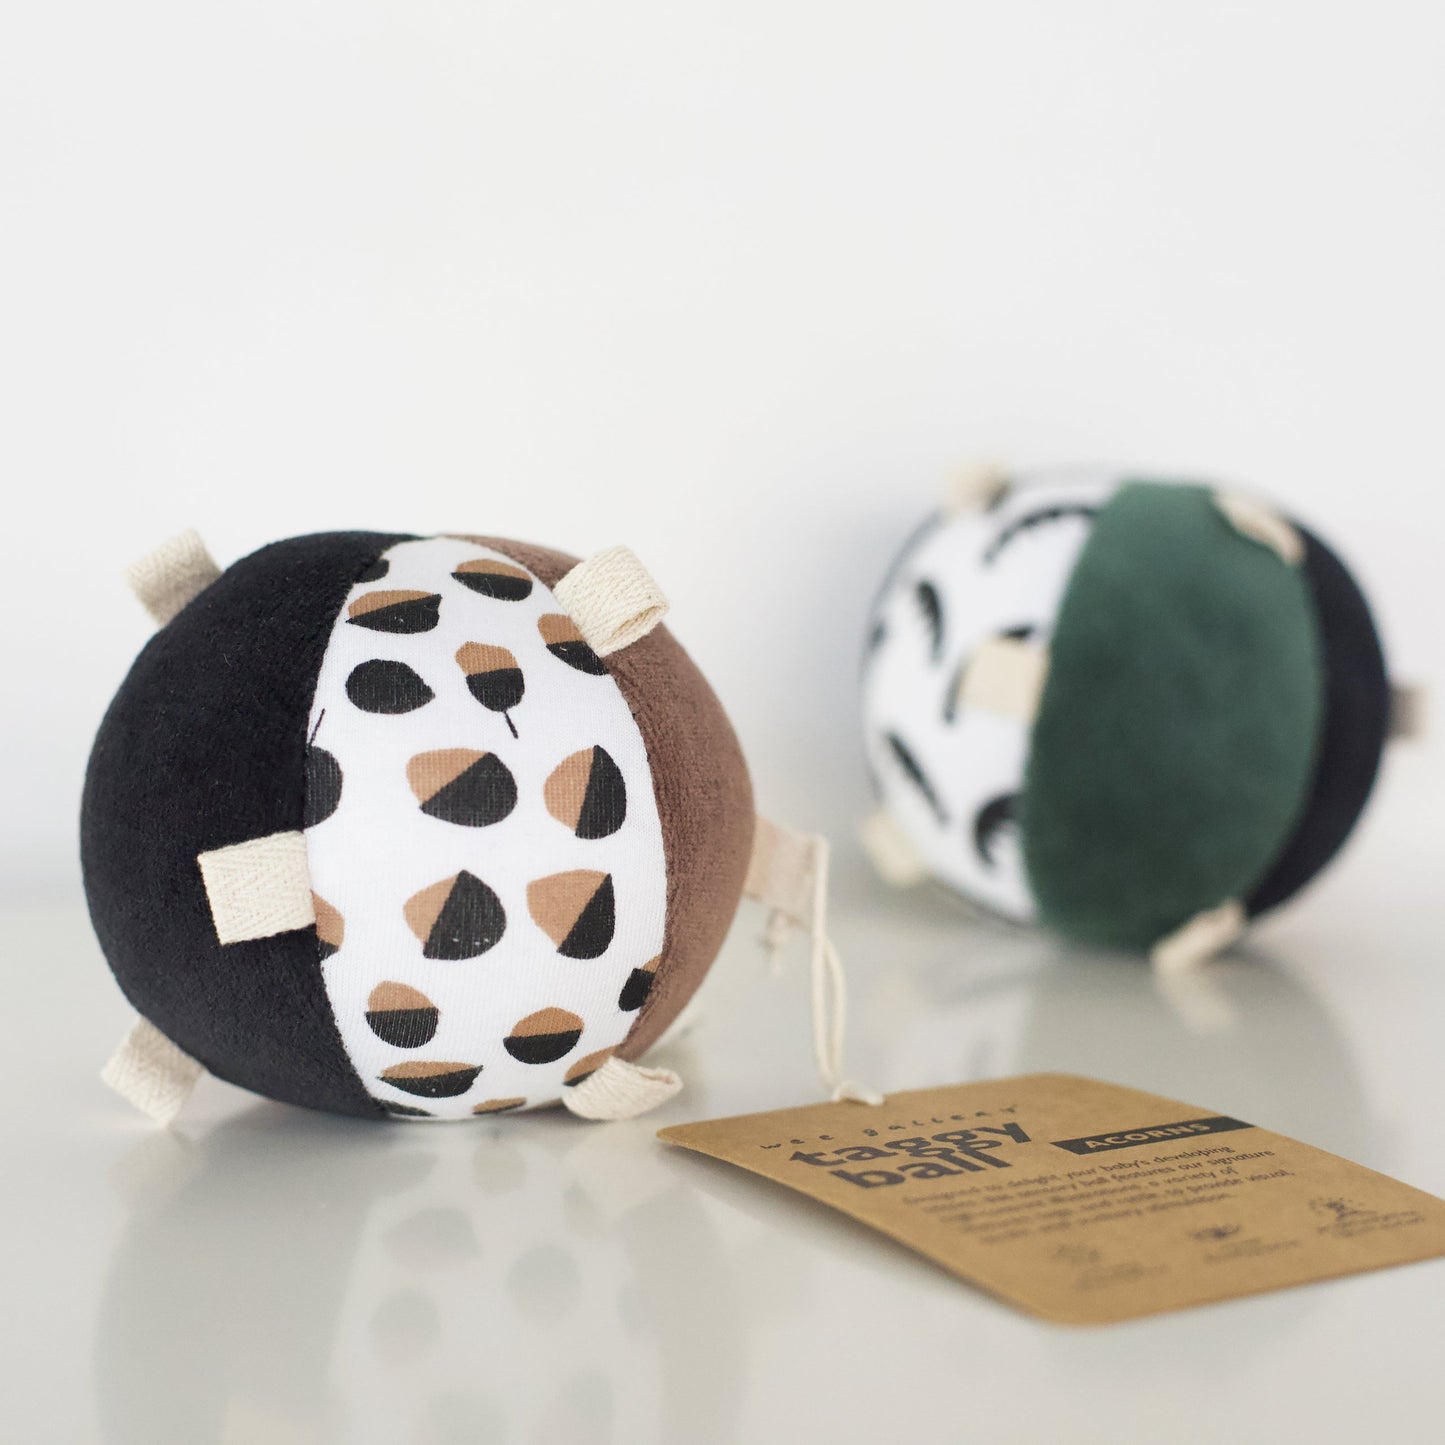 Wee Gallery Organic Cotton Taggy Ball With Rattle - Acorn 4"